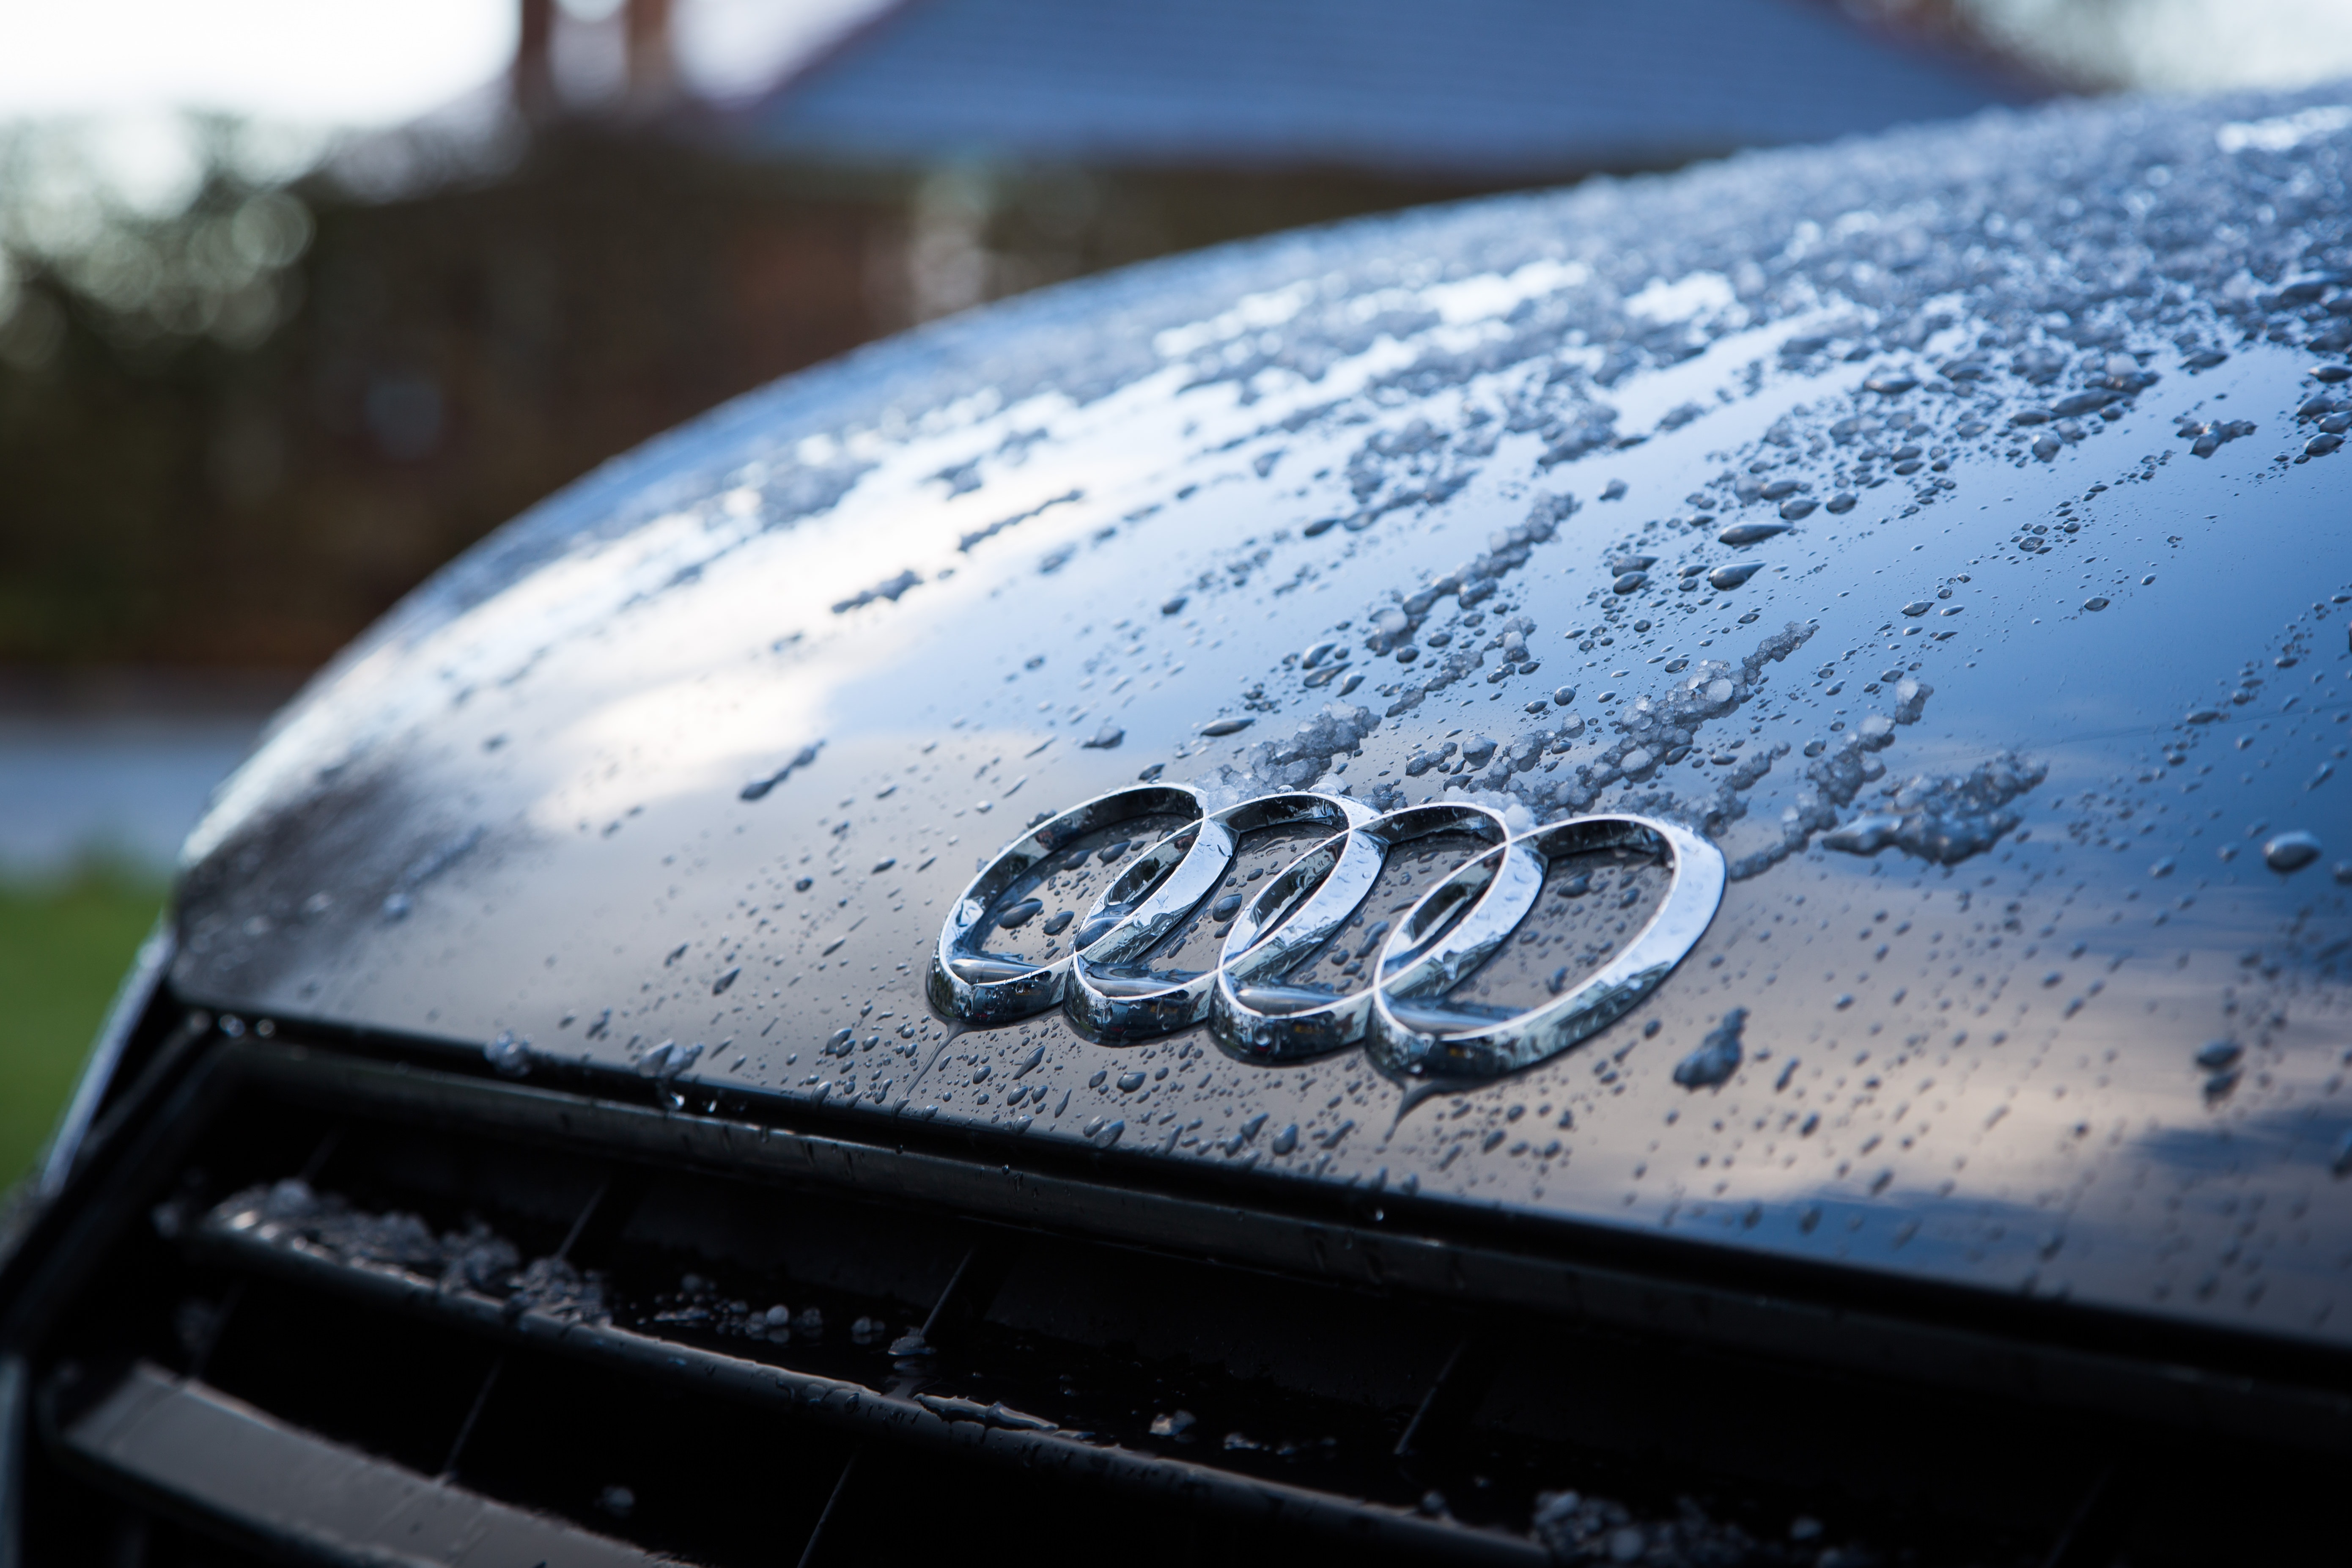 Audi photos download the best free audi stock photos hd images